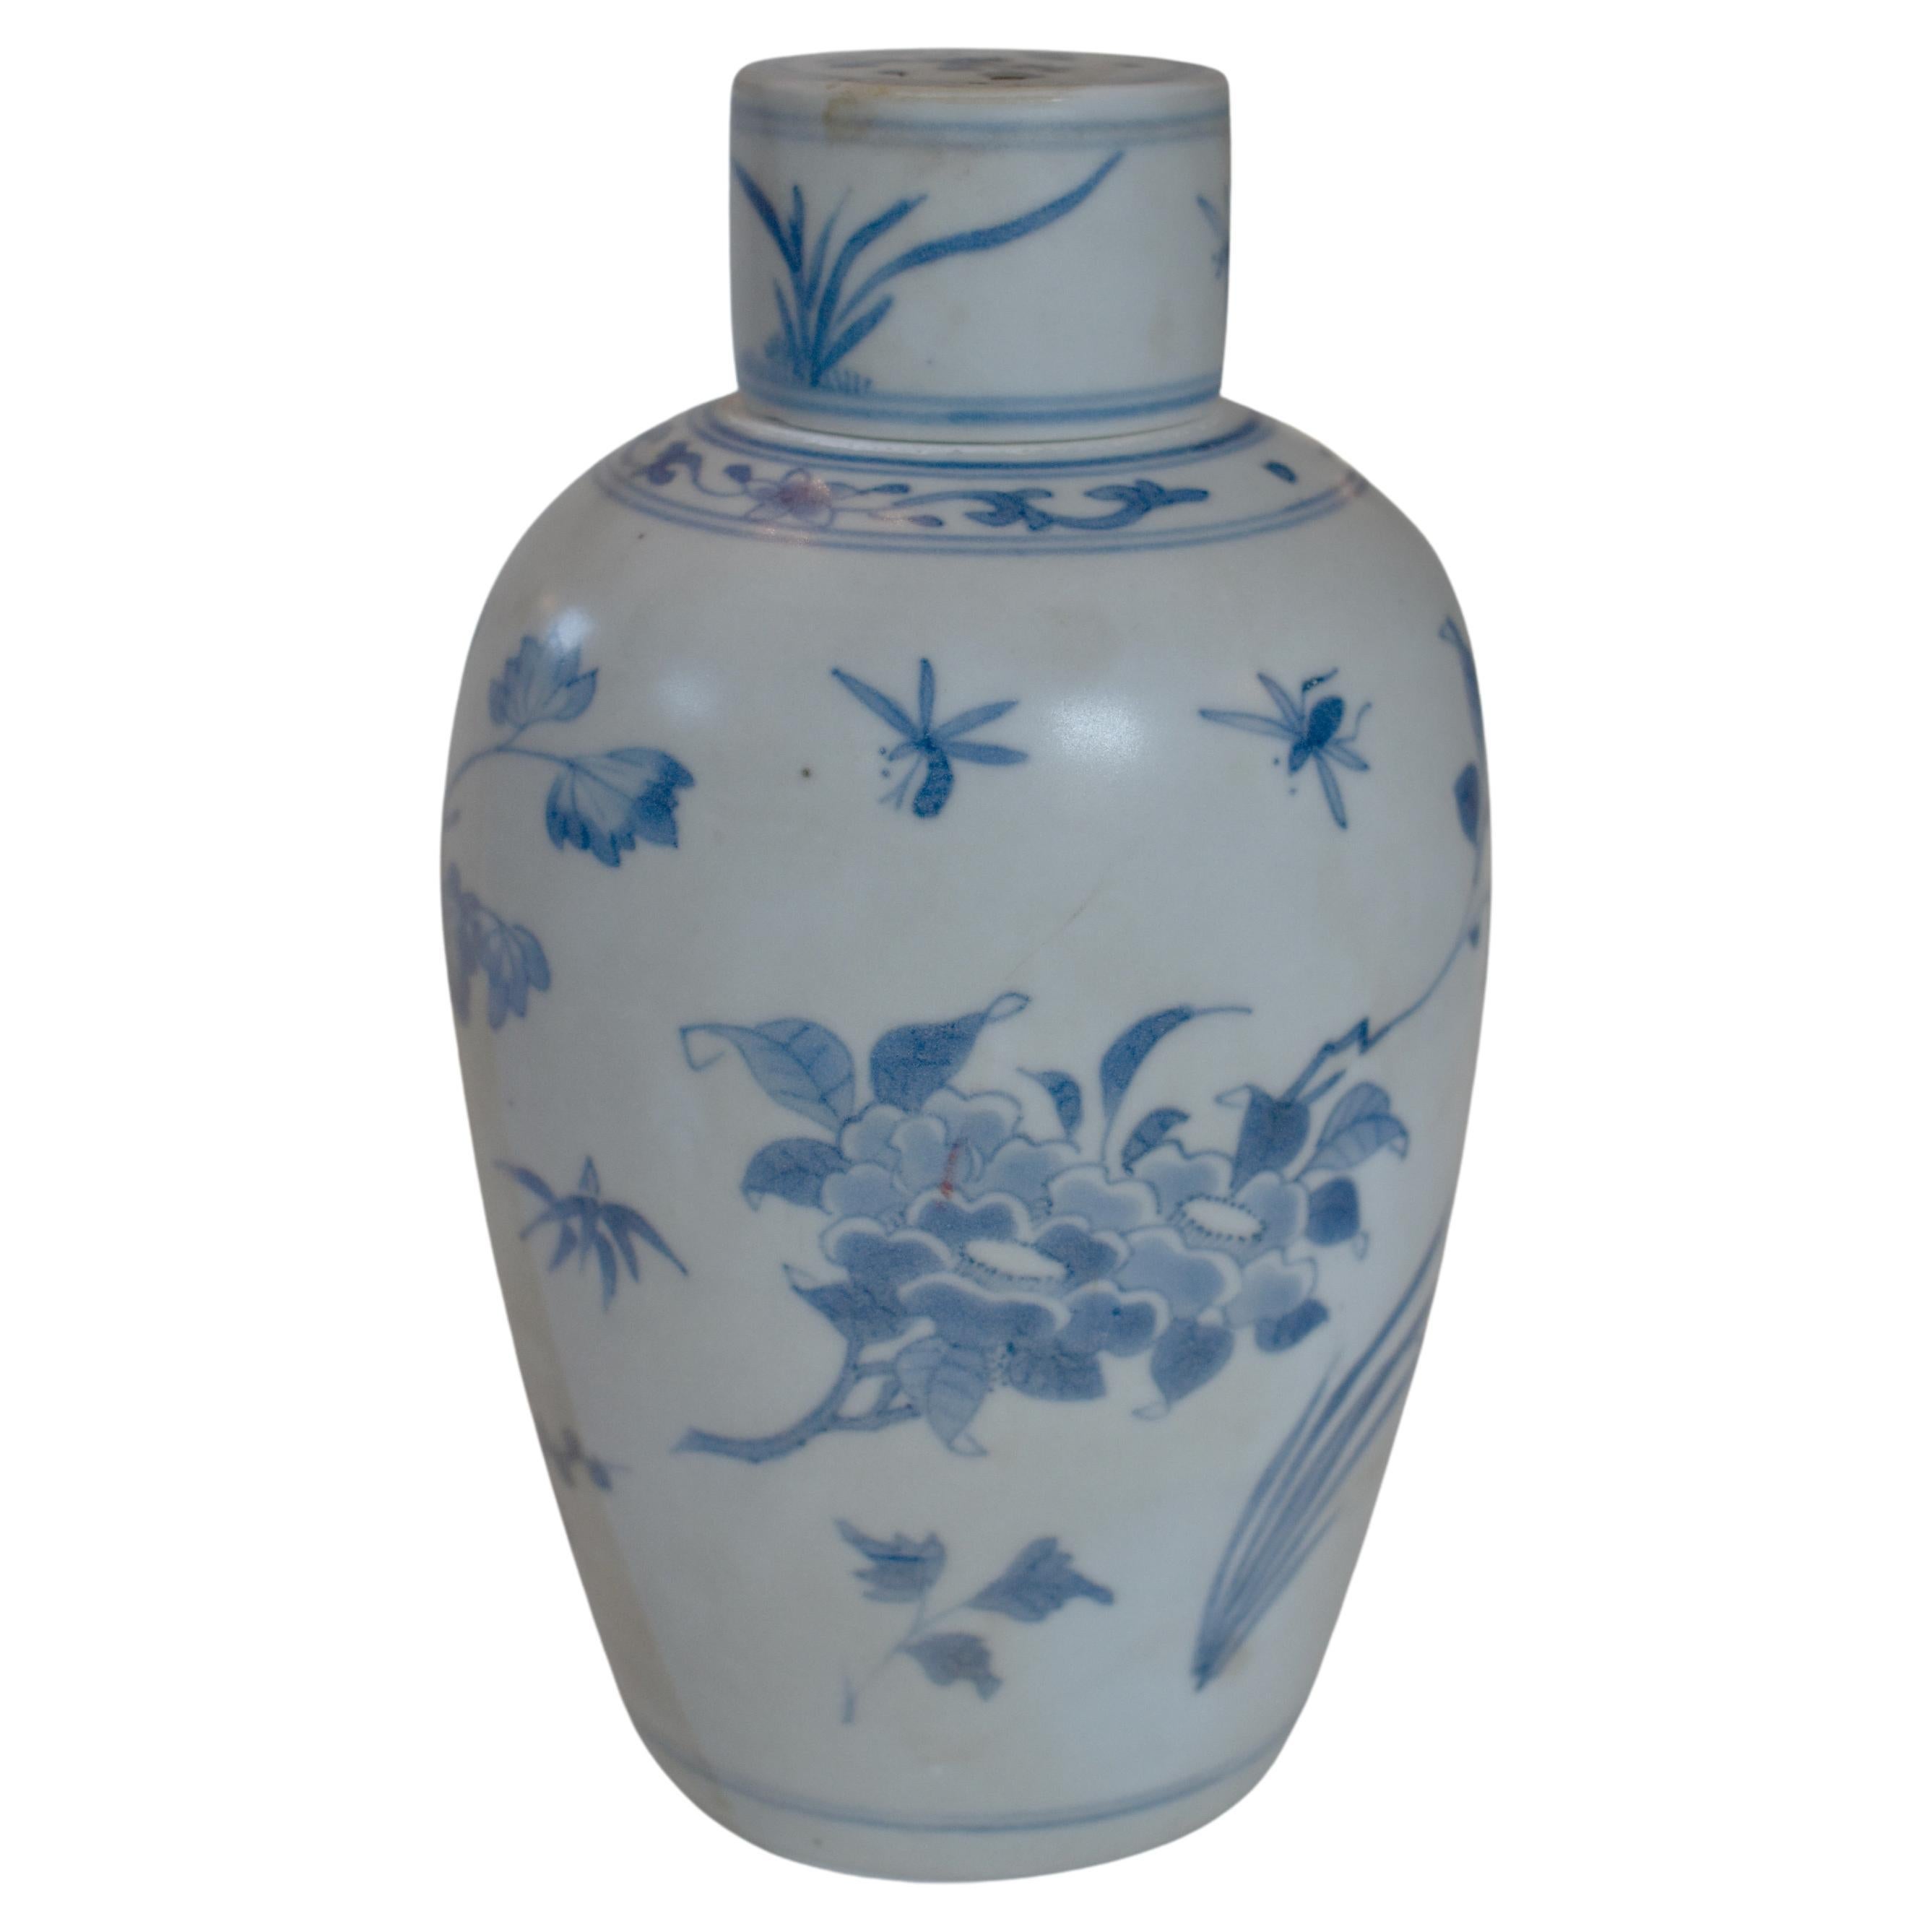 Transitional Period blue and white Chinese porcelain ovoid vase with cover from the Hatcher Collection. 

This vase was part of a hoard recovered by Captain Michael Hatcher from the wreck of a ship that sunk in the South China sea in 1643.